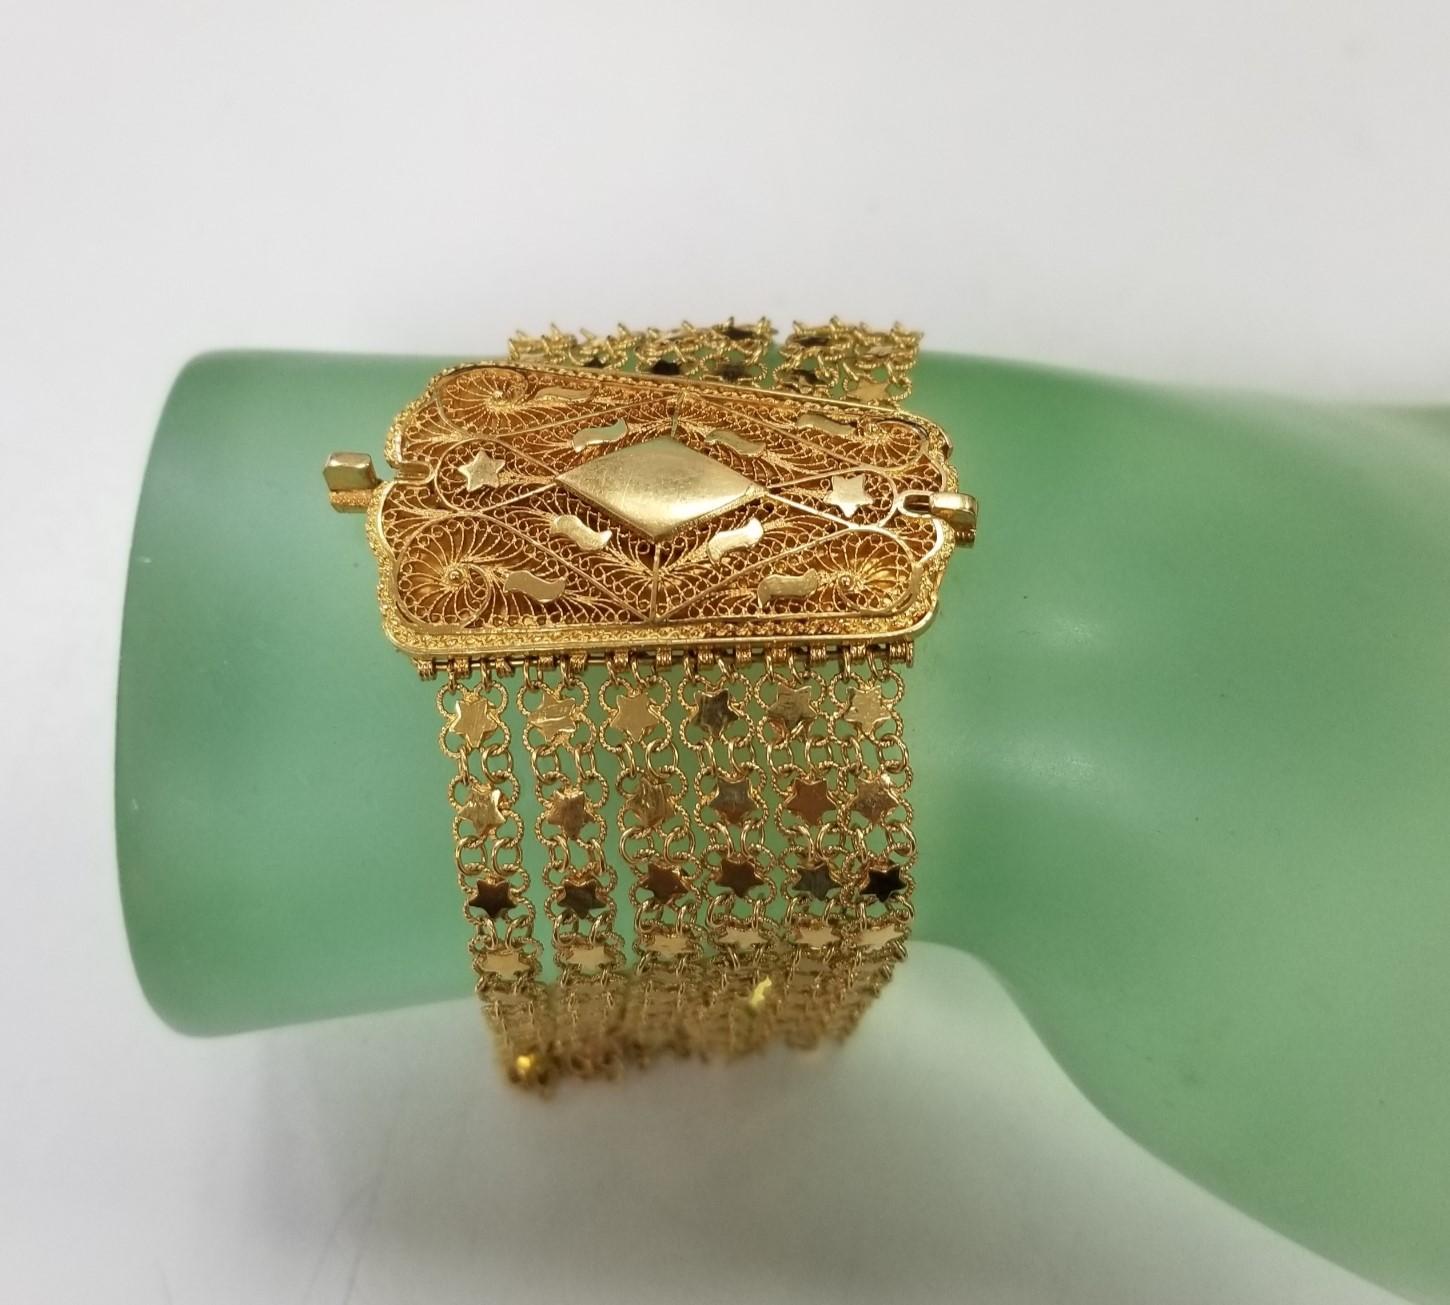 Vintage Geneve 14 Karat Yellow Gold Woven and Rope Bracelet Watch with Tassels For Sale 4